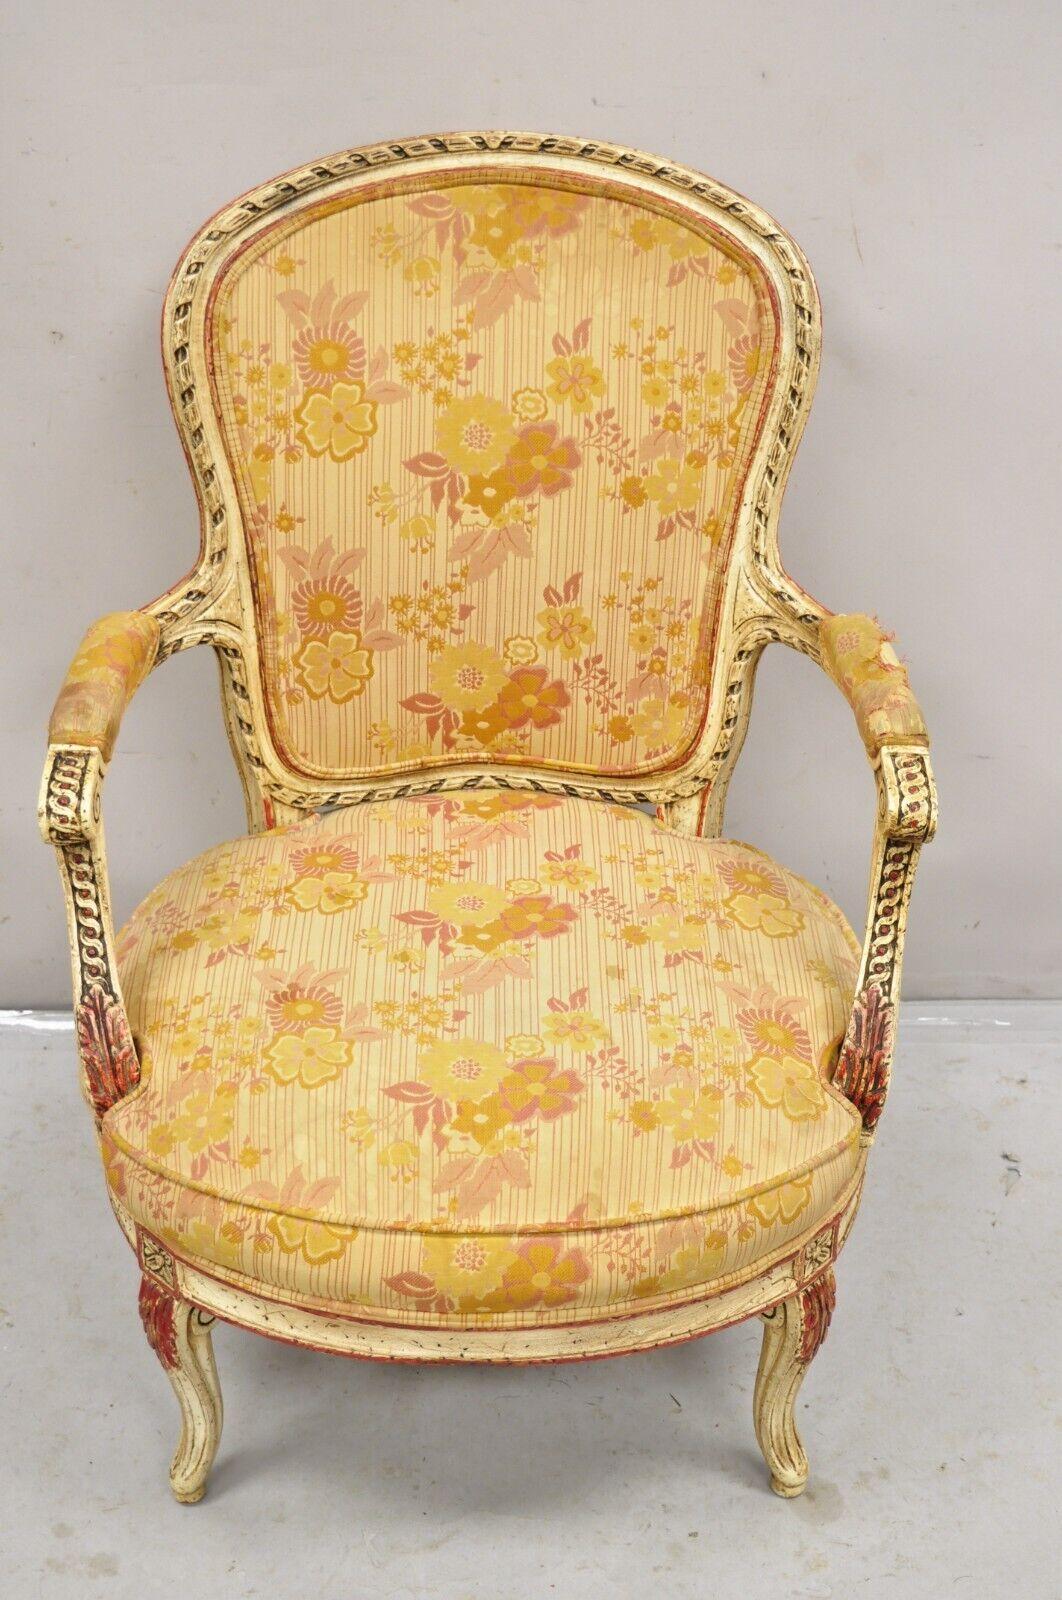 Vintage French Louis XV Style Cream and Red Painted Low Boudoir Fauteuil Chair For Sale 7